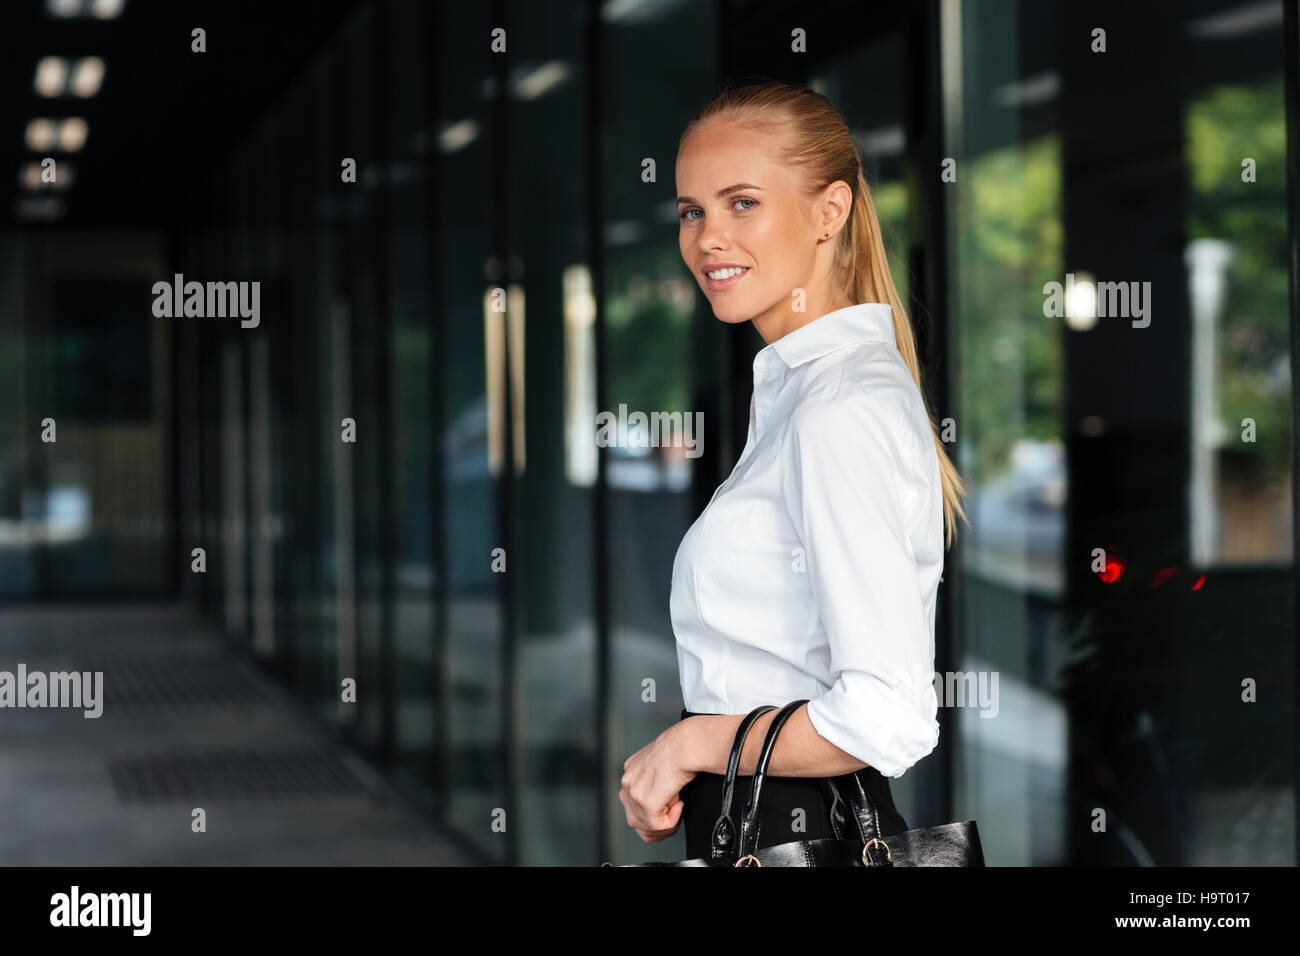 Happy smiling businesswoman standing and holing handbag outdoors Stock Photo